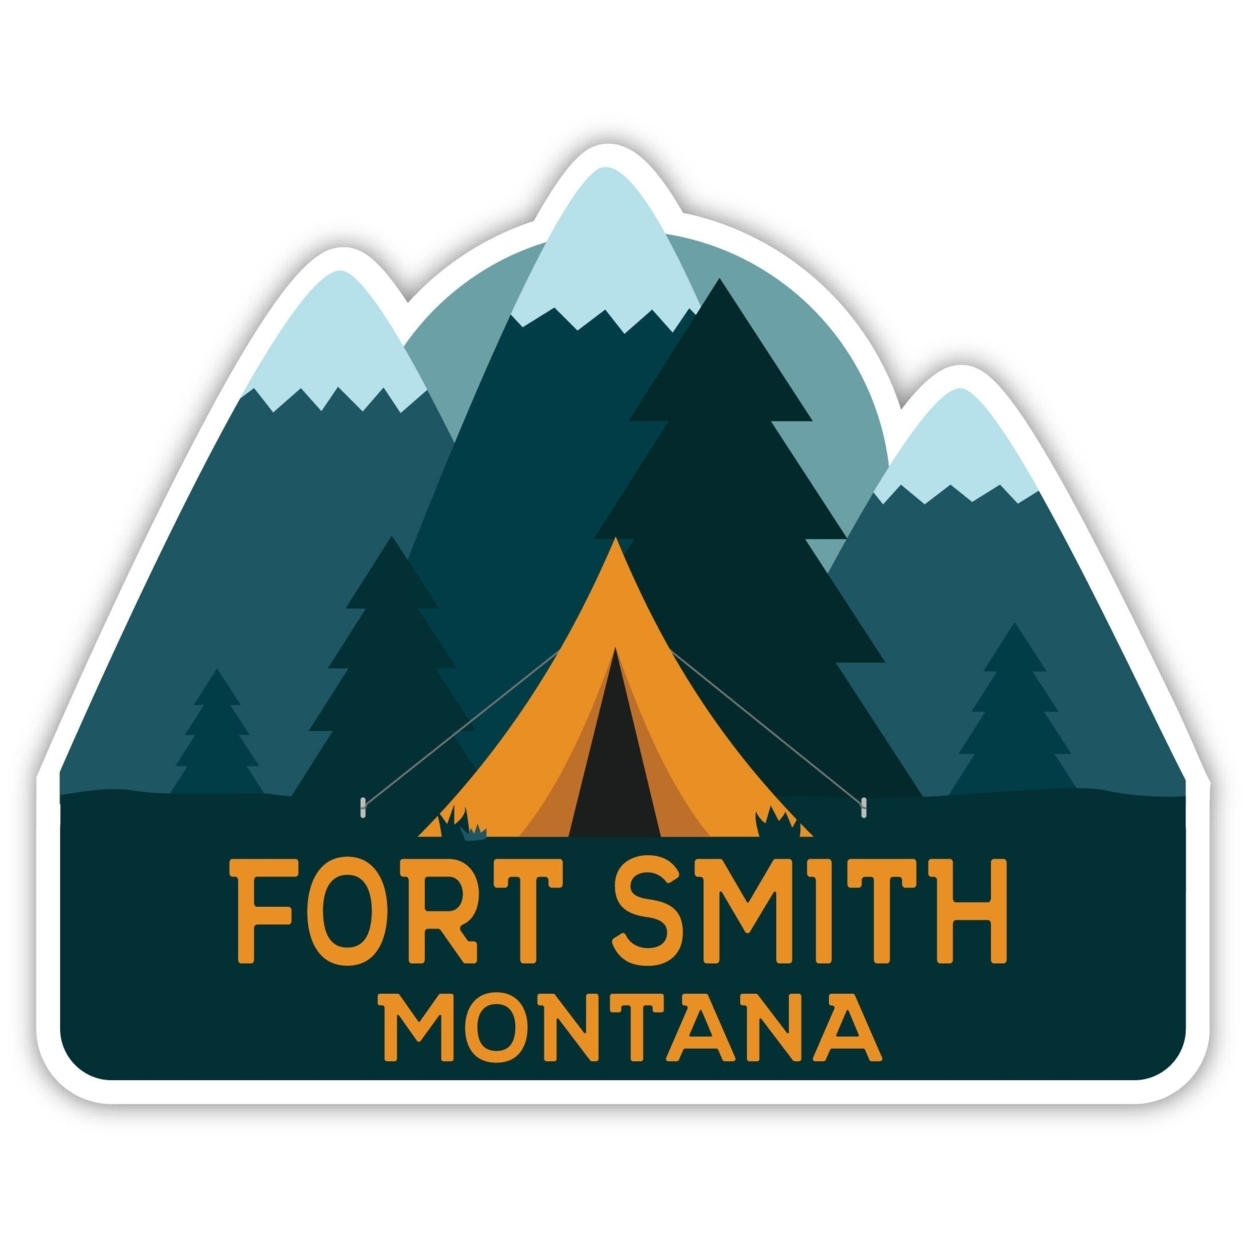 Fort Smith Montana Souvenir Decorative Stickers (Choose Theme And Size) - 4-Pack, 8-Inch, Bear